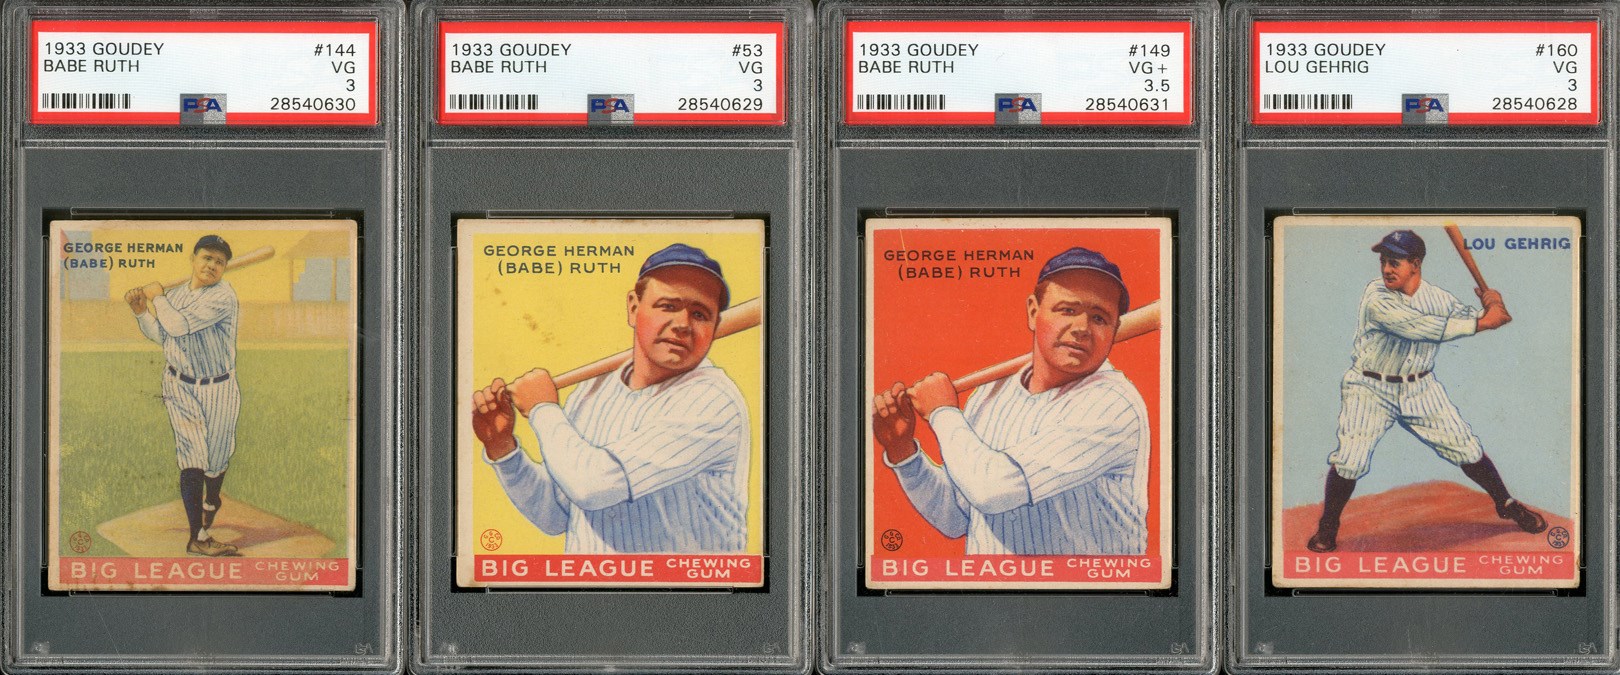 - 1933 Goudey Collection with Three Ruths and One Gehrig